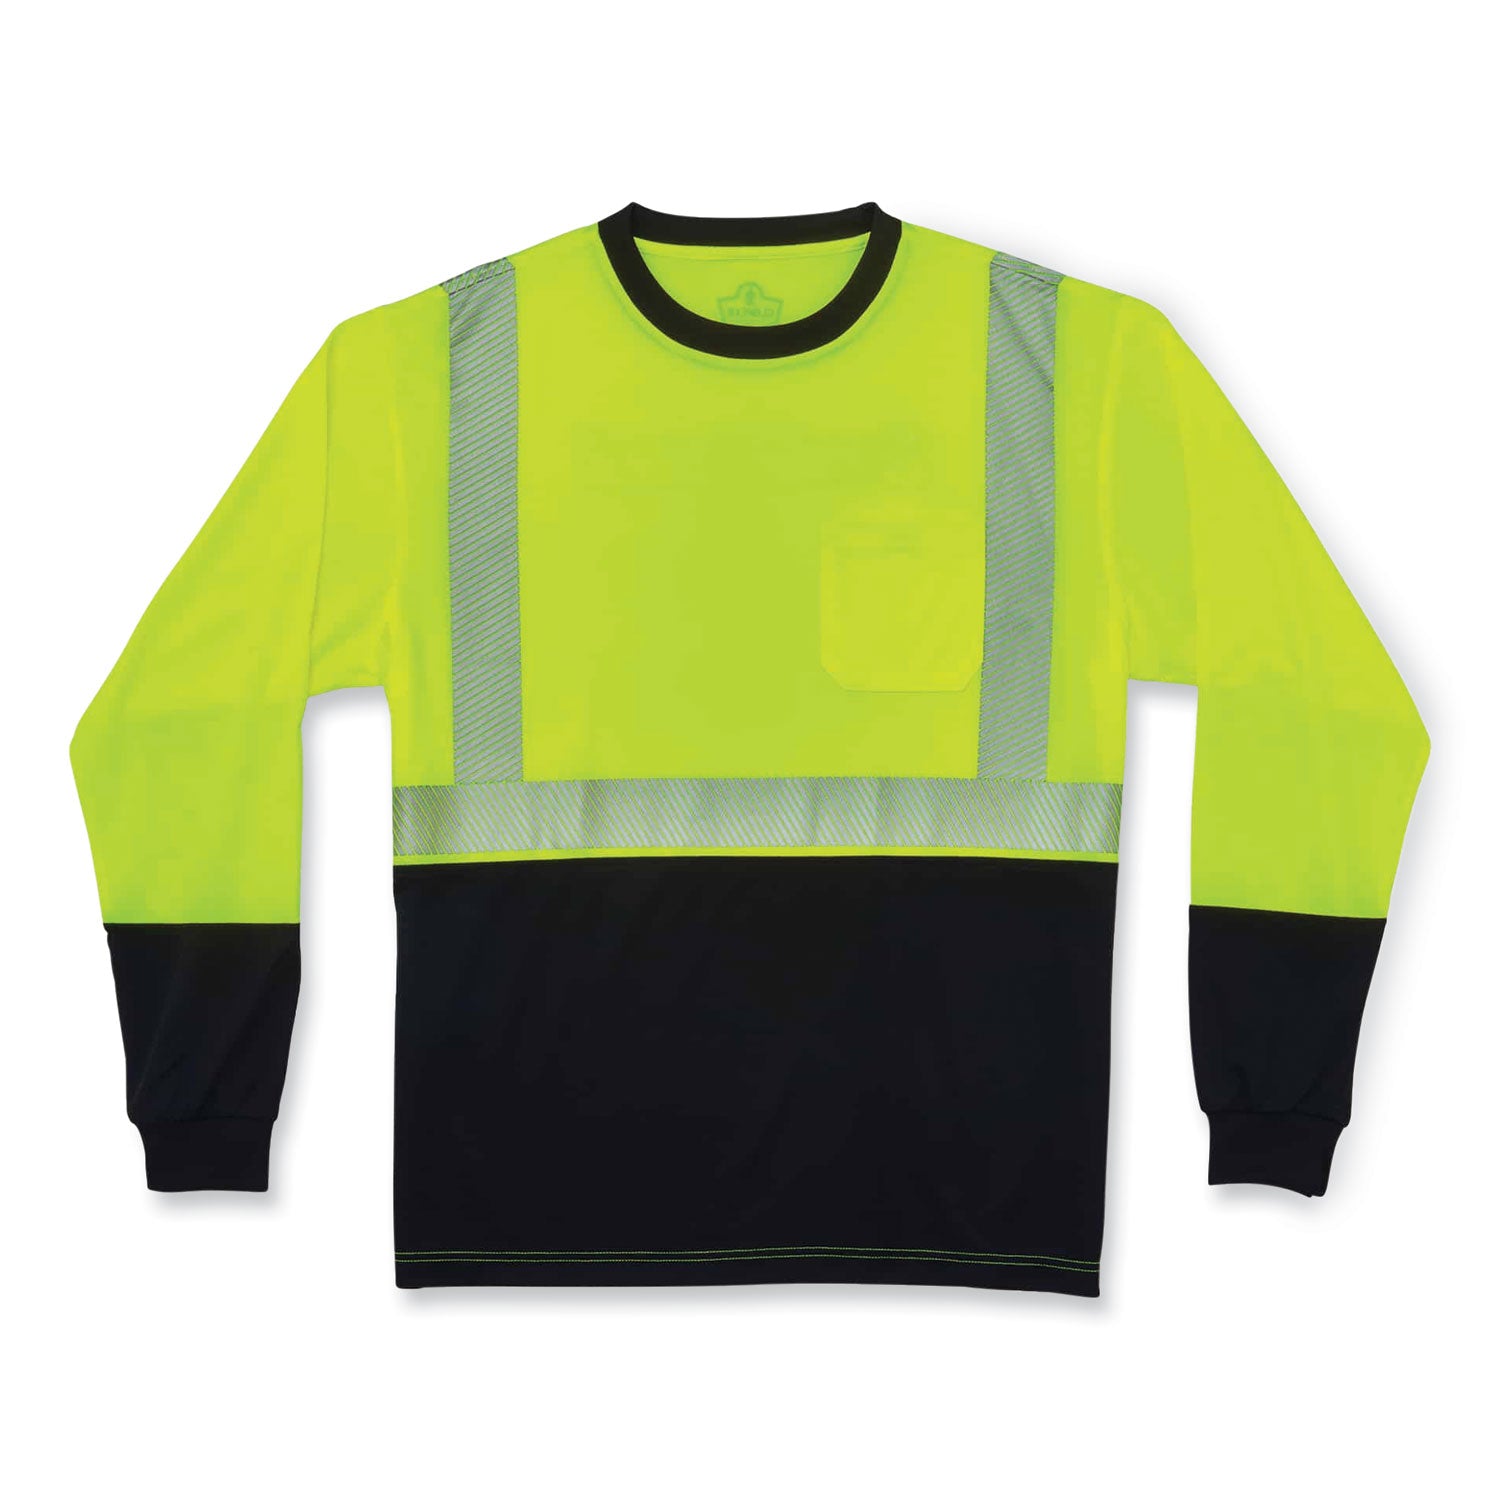 glowear-8281bk-class-2-long-sleeve-shirt-with-black-bottom-polyester-3x-large-lime-ships-in-1-3-business-days_ego22637 - 1